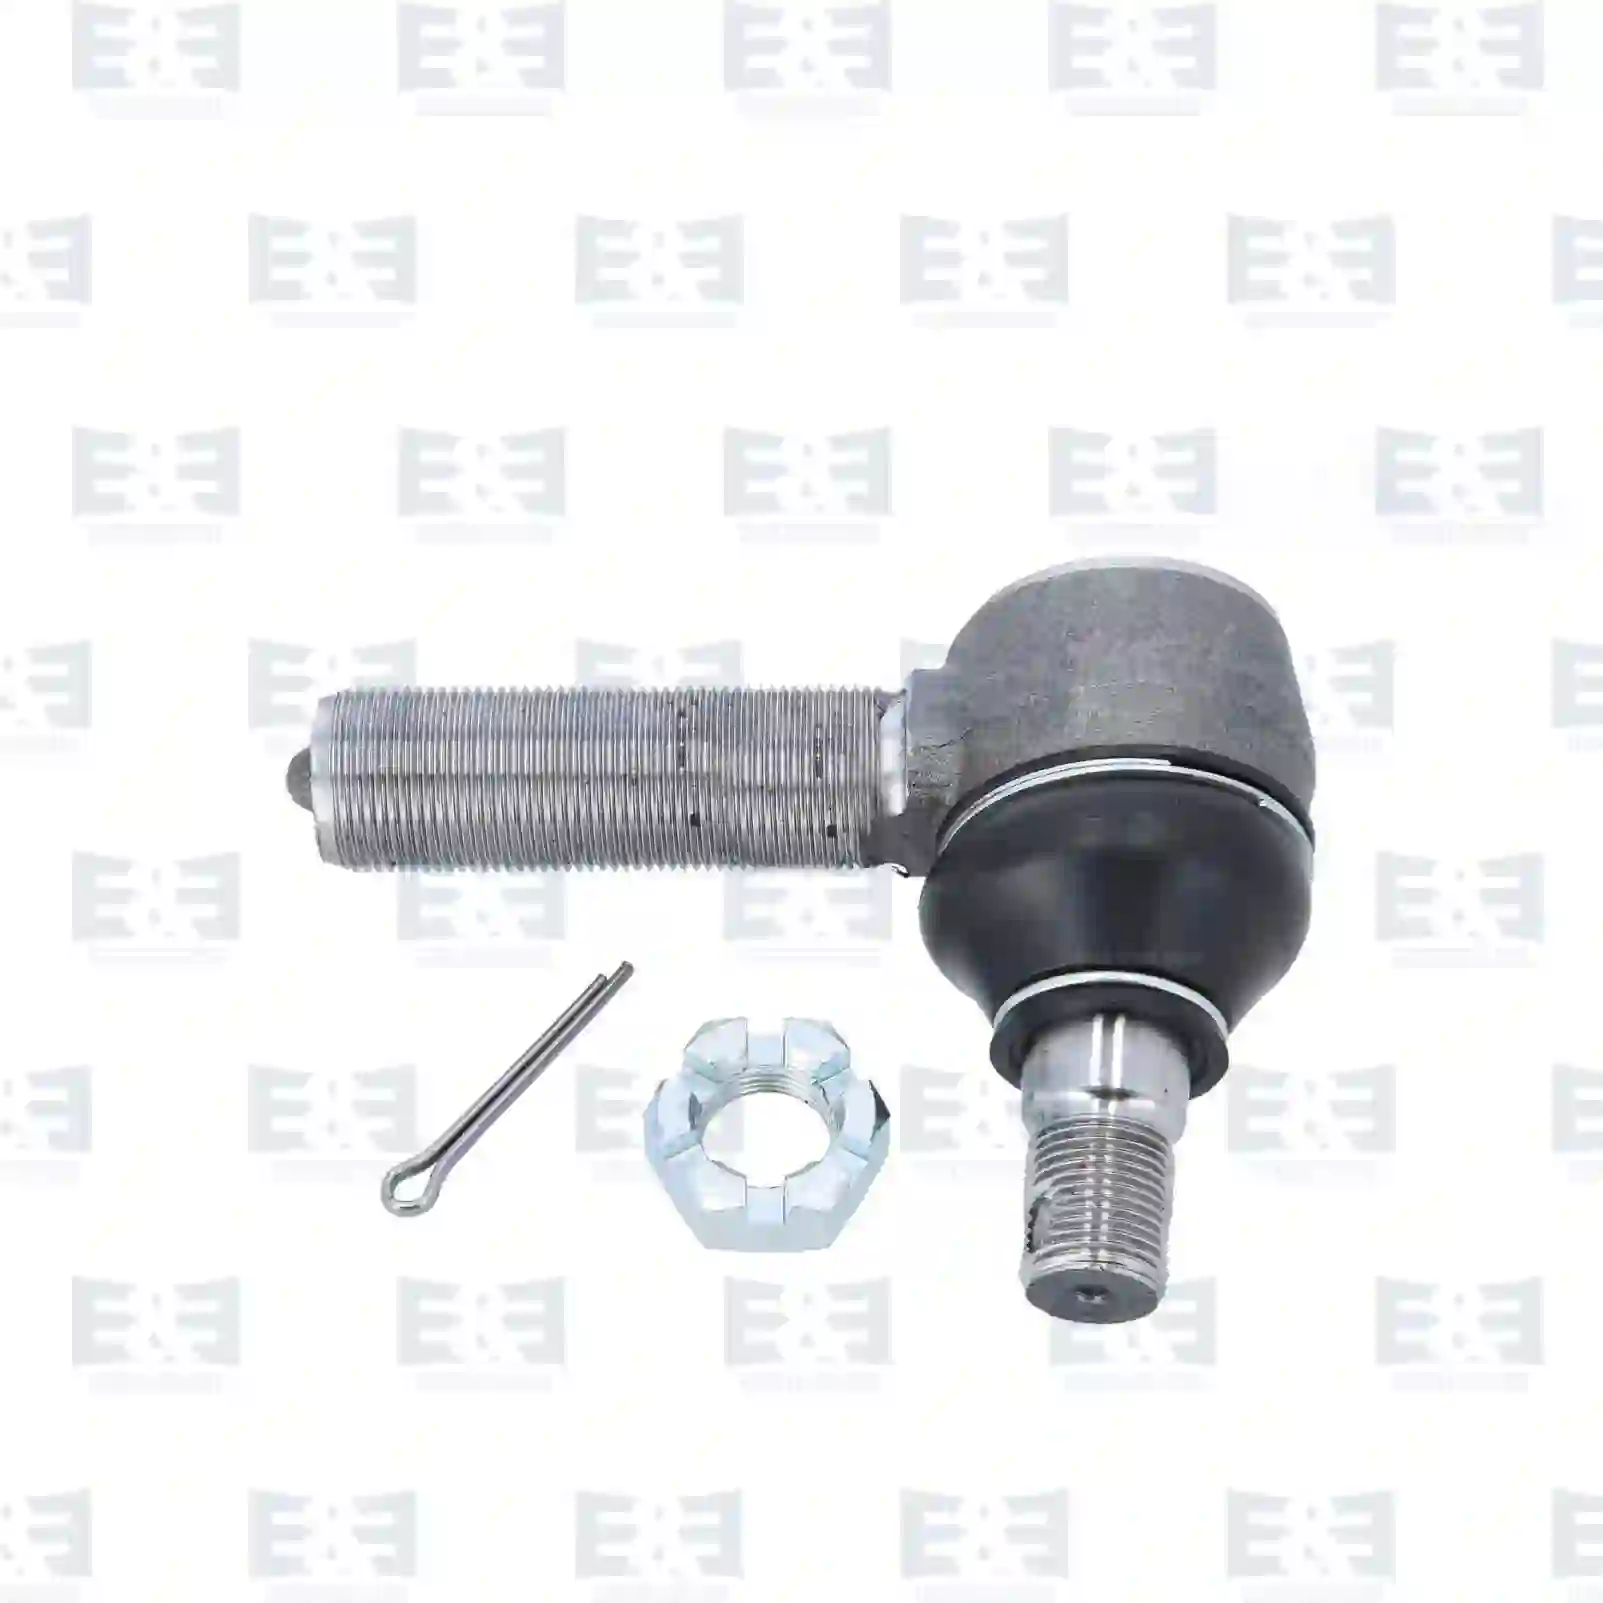 Drag Link Ball joint, right hand thread, EE No 2E2206136 ,  oem no:3221931R91, 02311220, 08558527, 42487165, 8558527, AL38645, 0003301235, 0003307535, 0003309735, 0003309935, 0003383429, 0003383529, 0023301335, 6313300535, X5424102, 120324001, 1696919, 85125134, ZG40370-0008 E&E Truck Spare Parts | Truck Spare Parts, Auotomotive Spare Parts